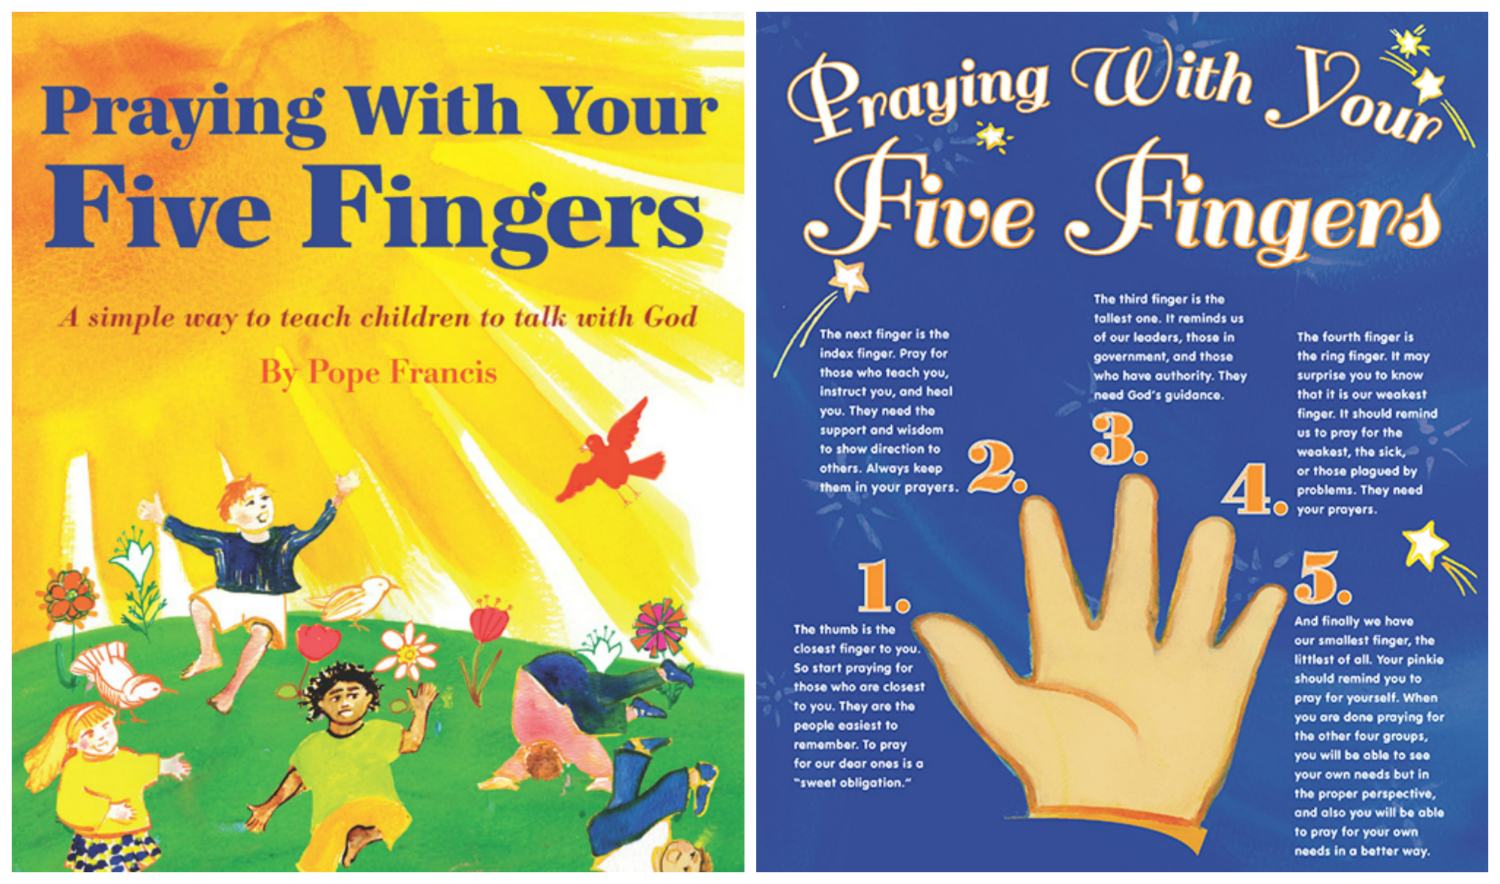 Praying with your five fingers